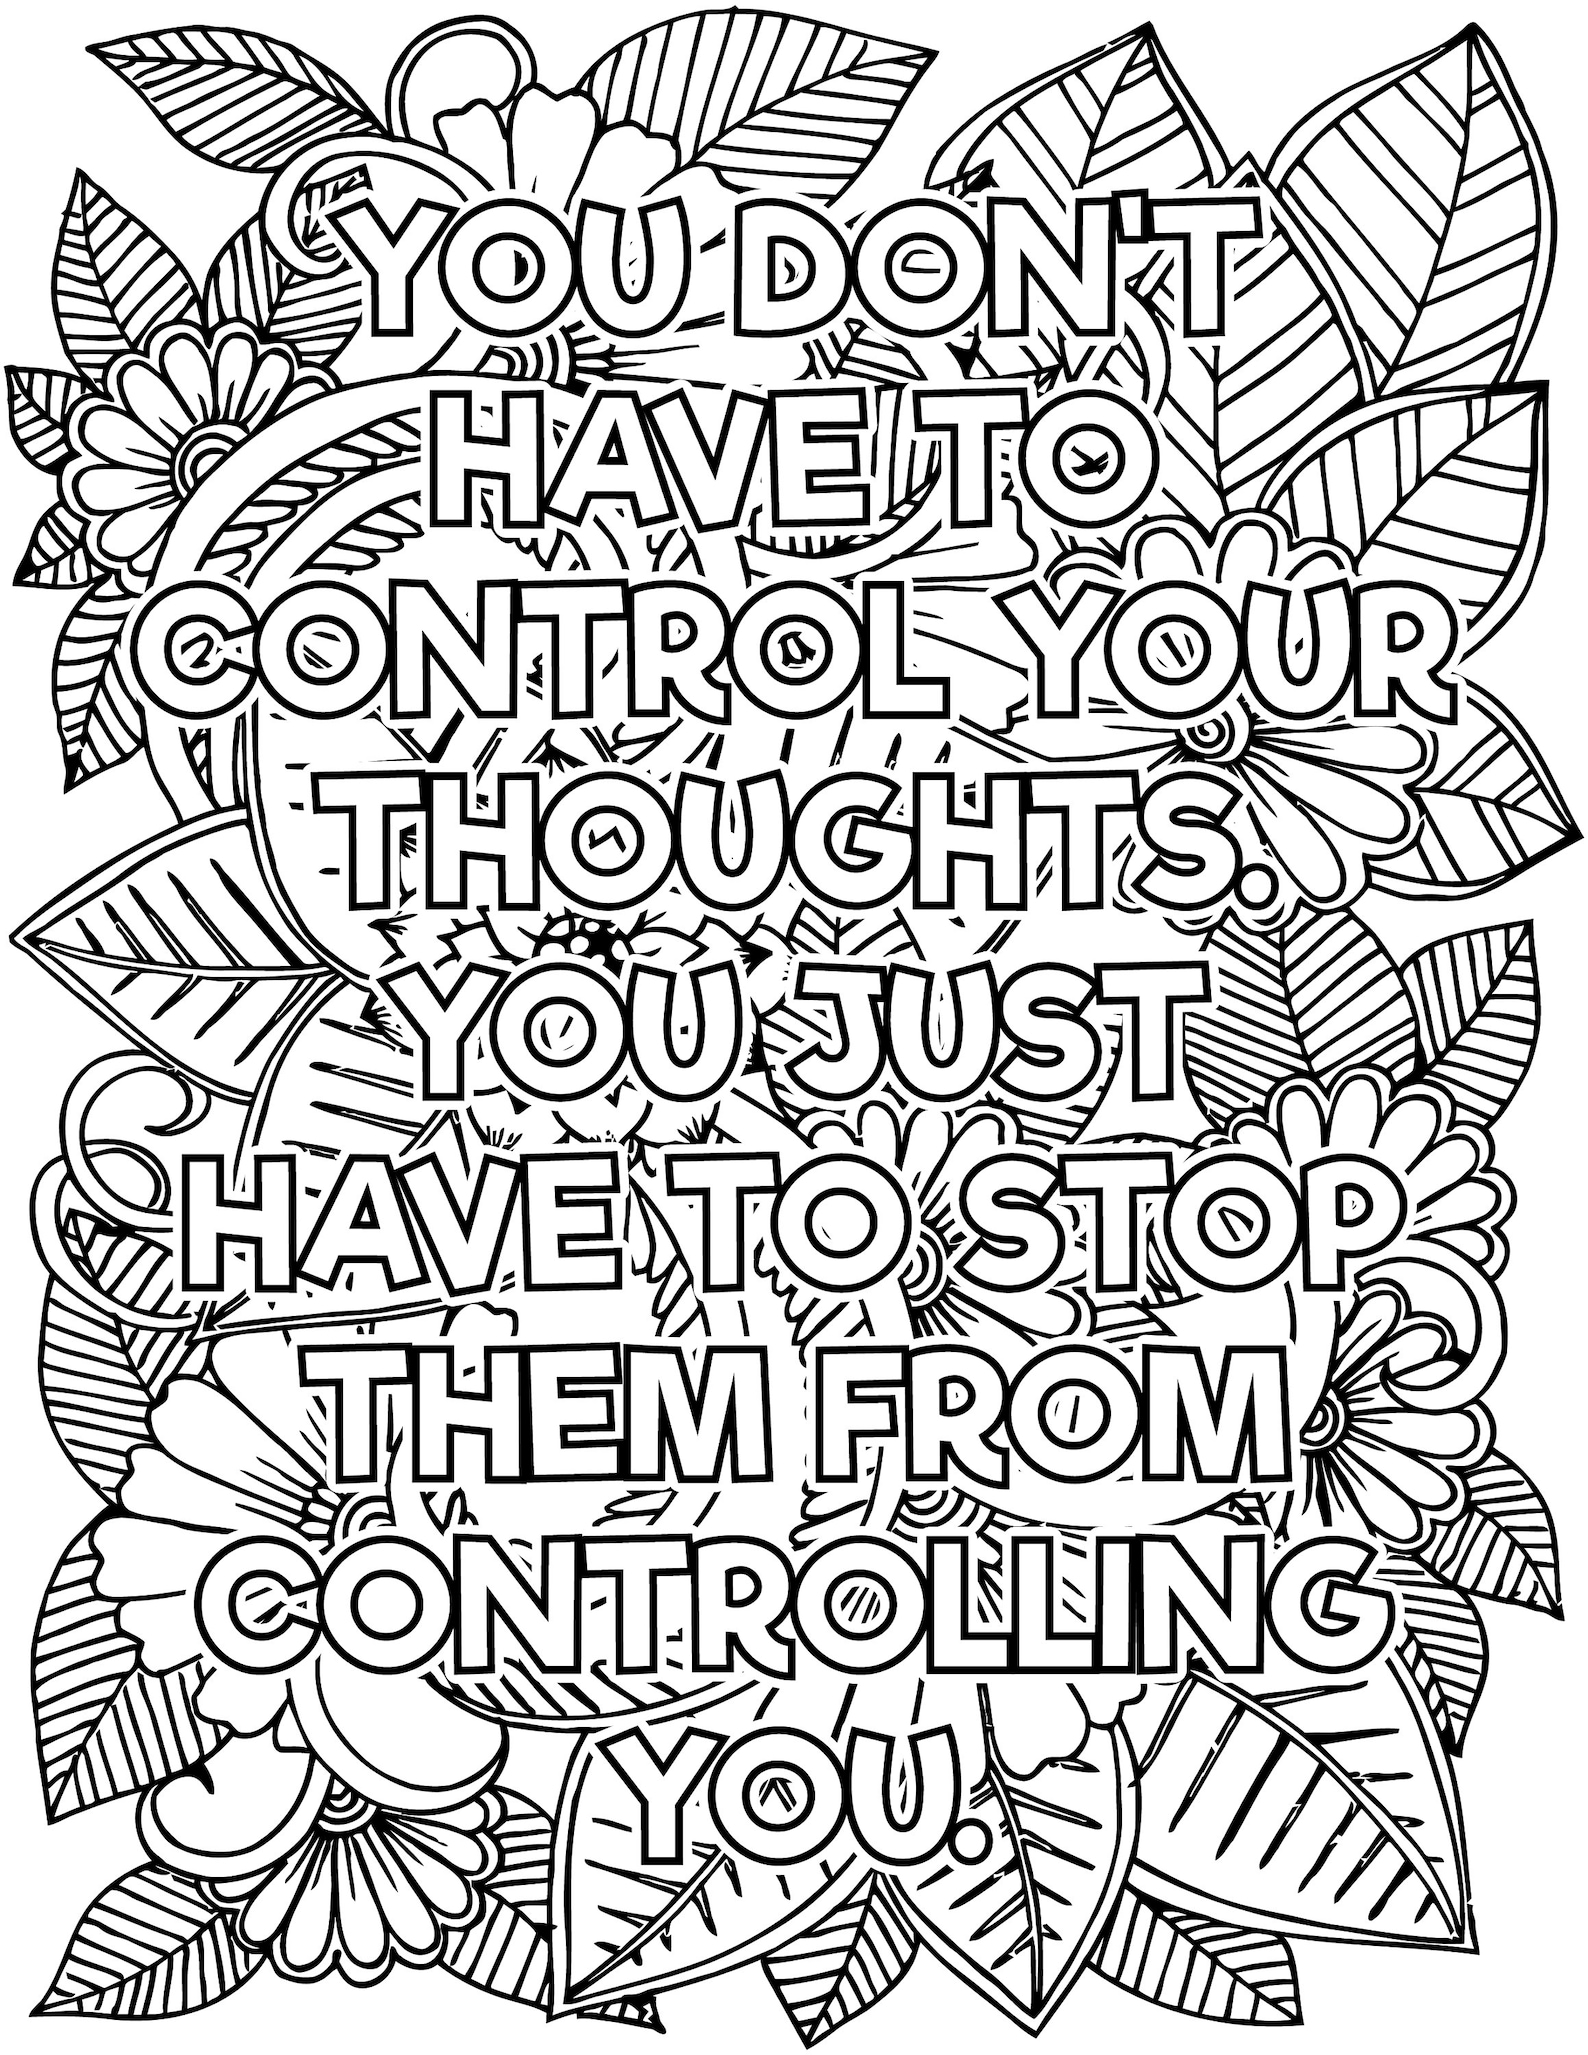 mental-health-coloring-pages